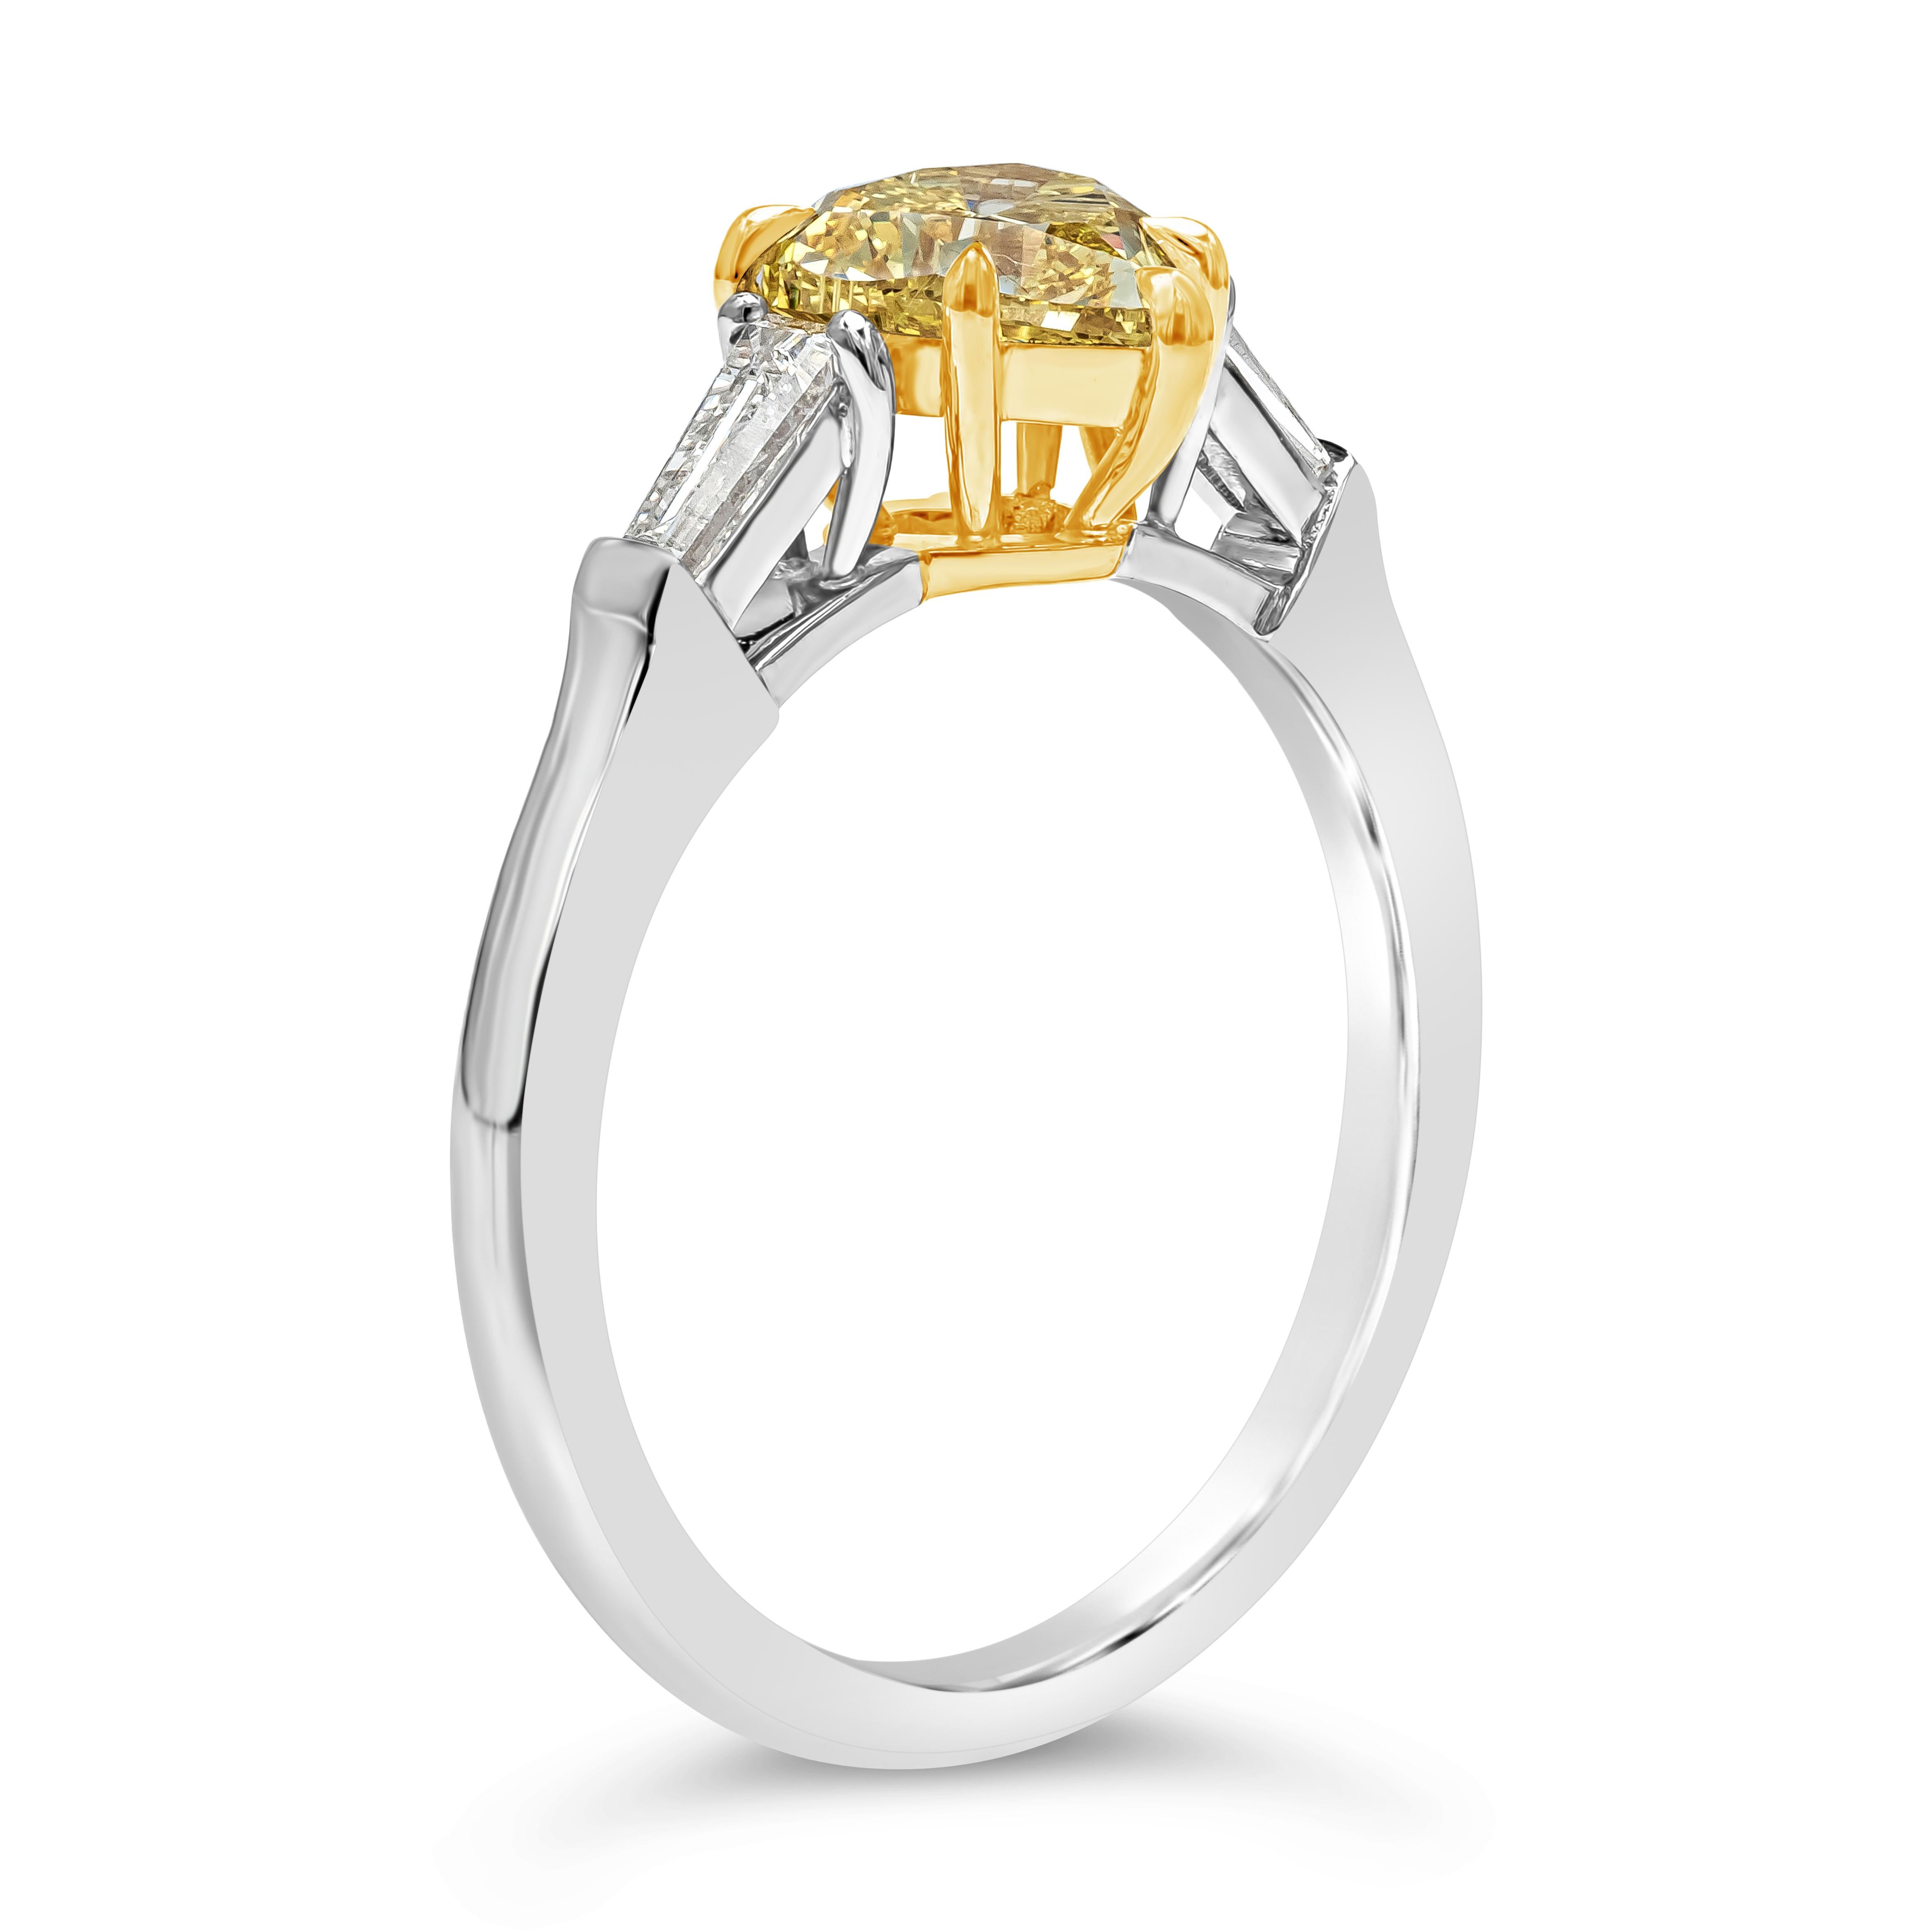 Contemporary 1.01 Carats Heart Shape Fancy Vivid Yellow Diamond Three Stone Engagement Ring For Sale